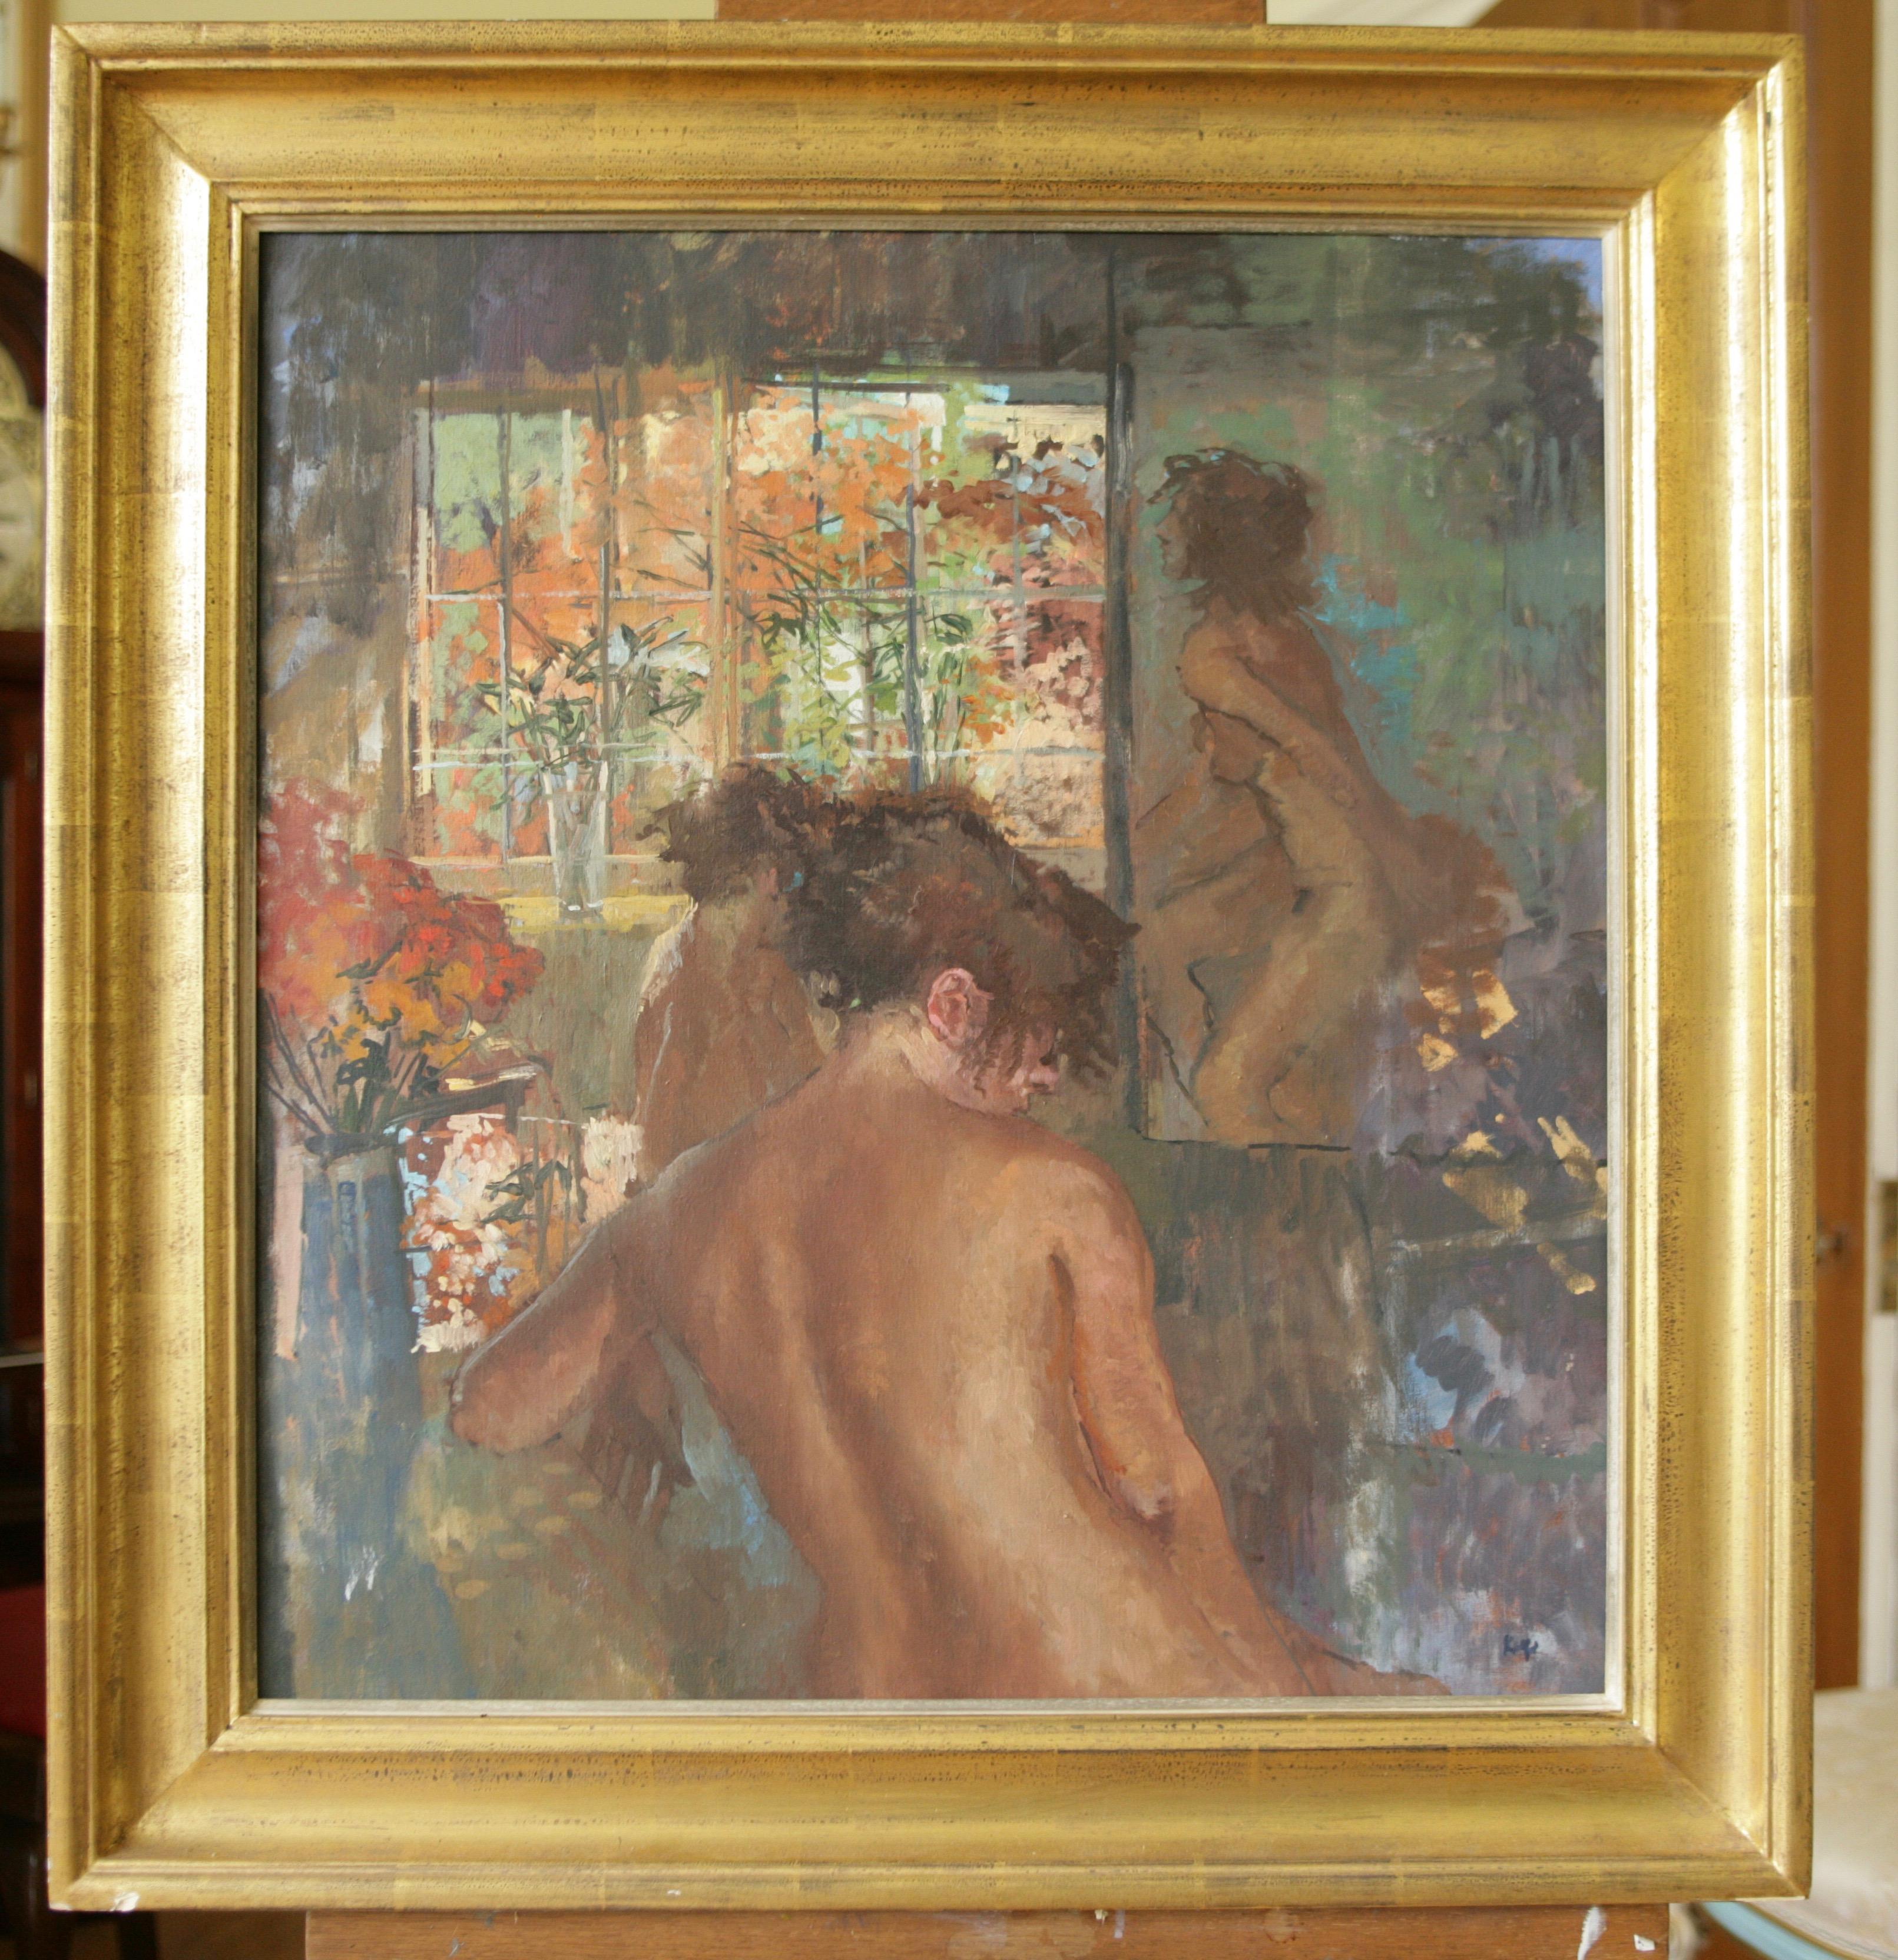 NEUES Modell im SUMMER ROOM (Impressionismus), Painting, von Peter Kuhfeld